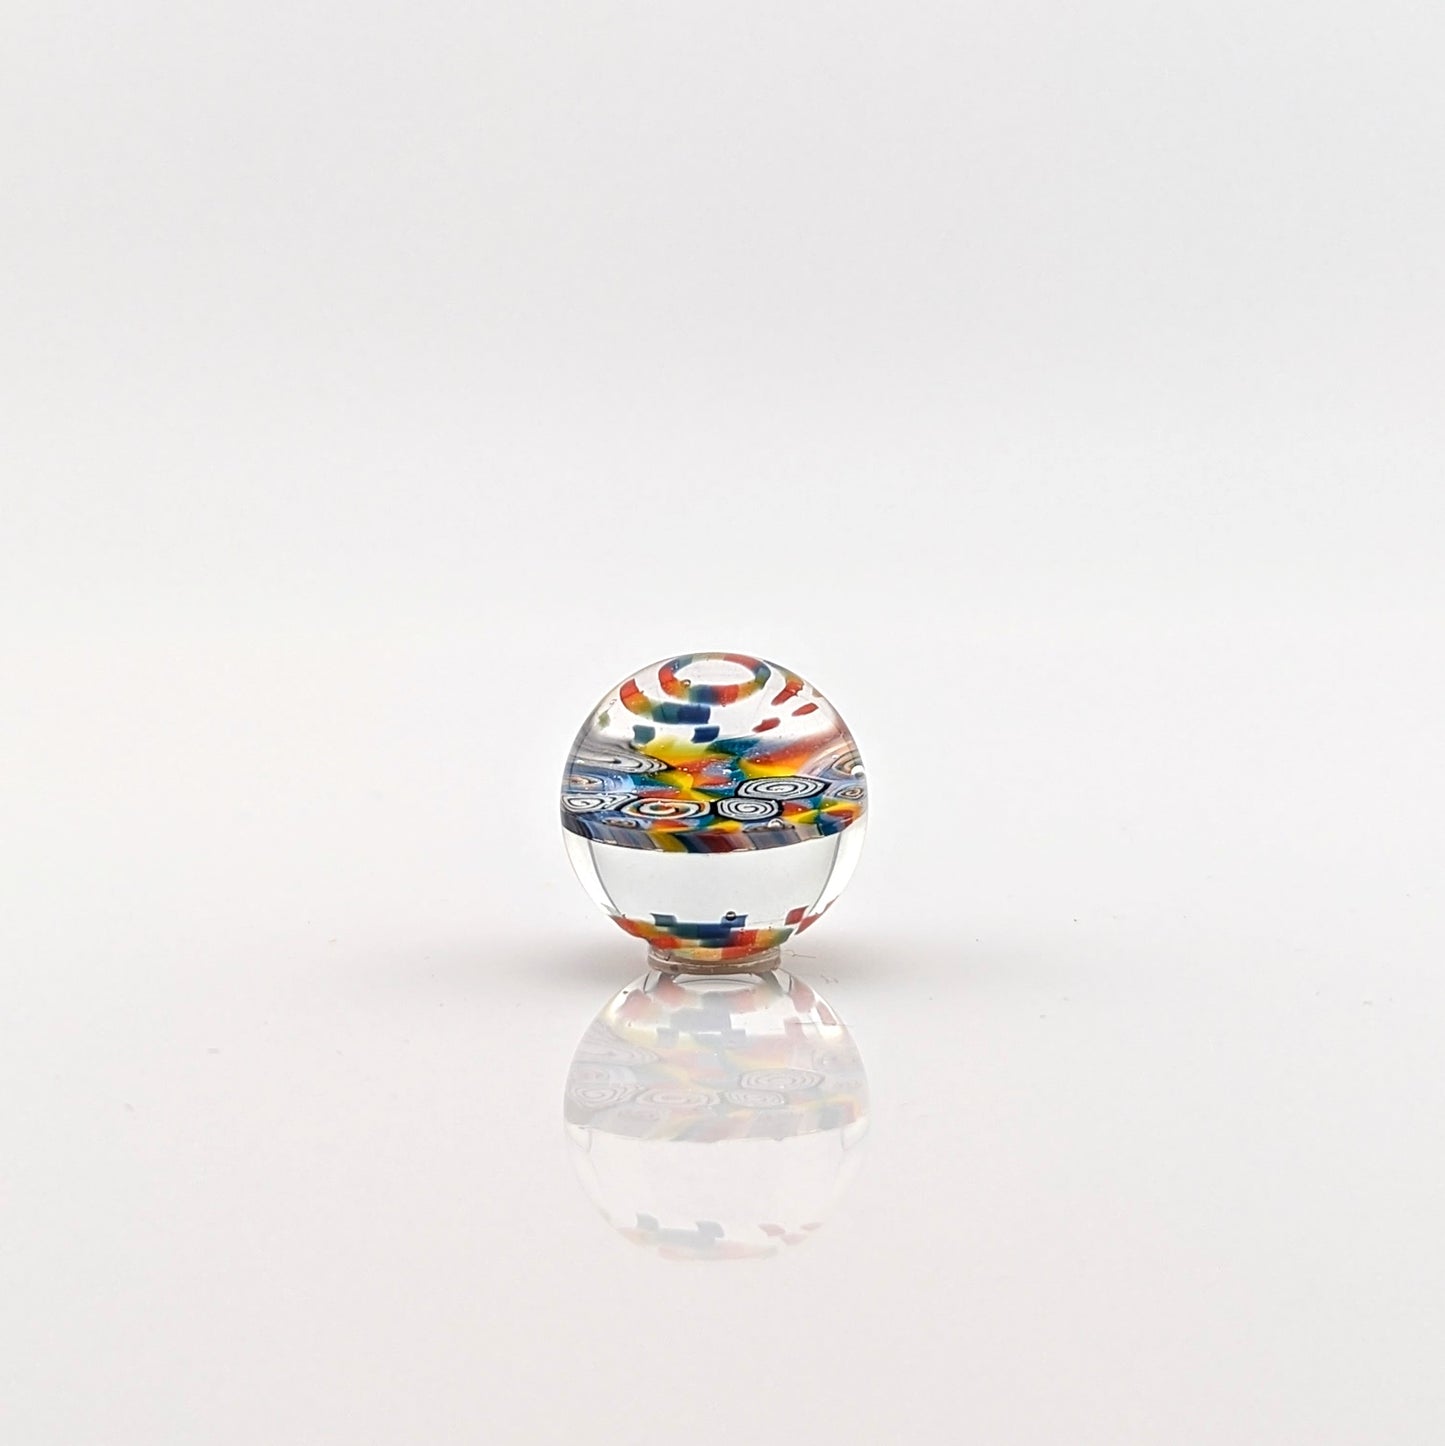 BMFT 2024 Borosilicate Glass Marble 19 mm  Hand blown glass made by BMFT